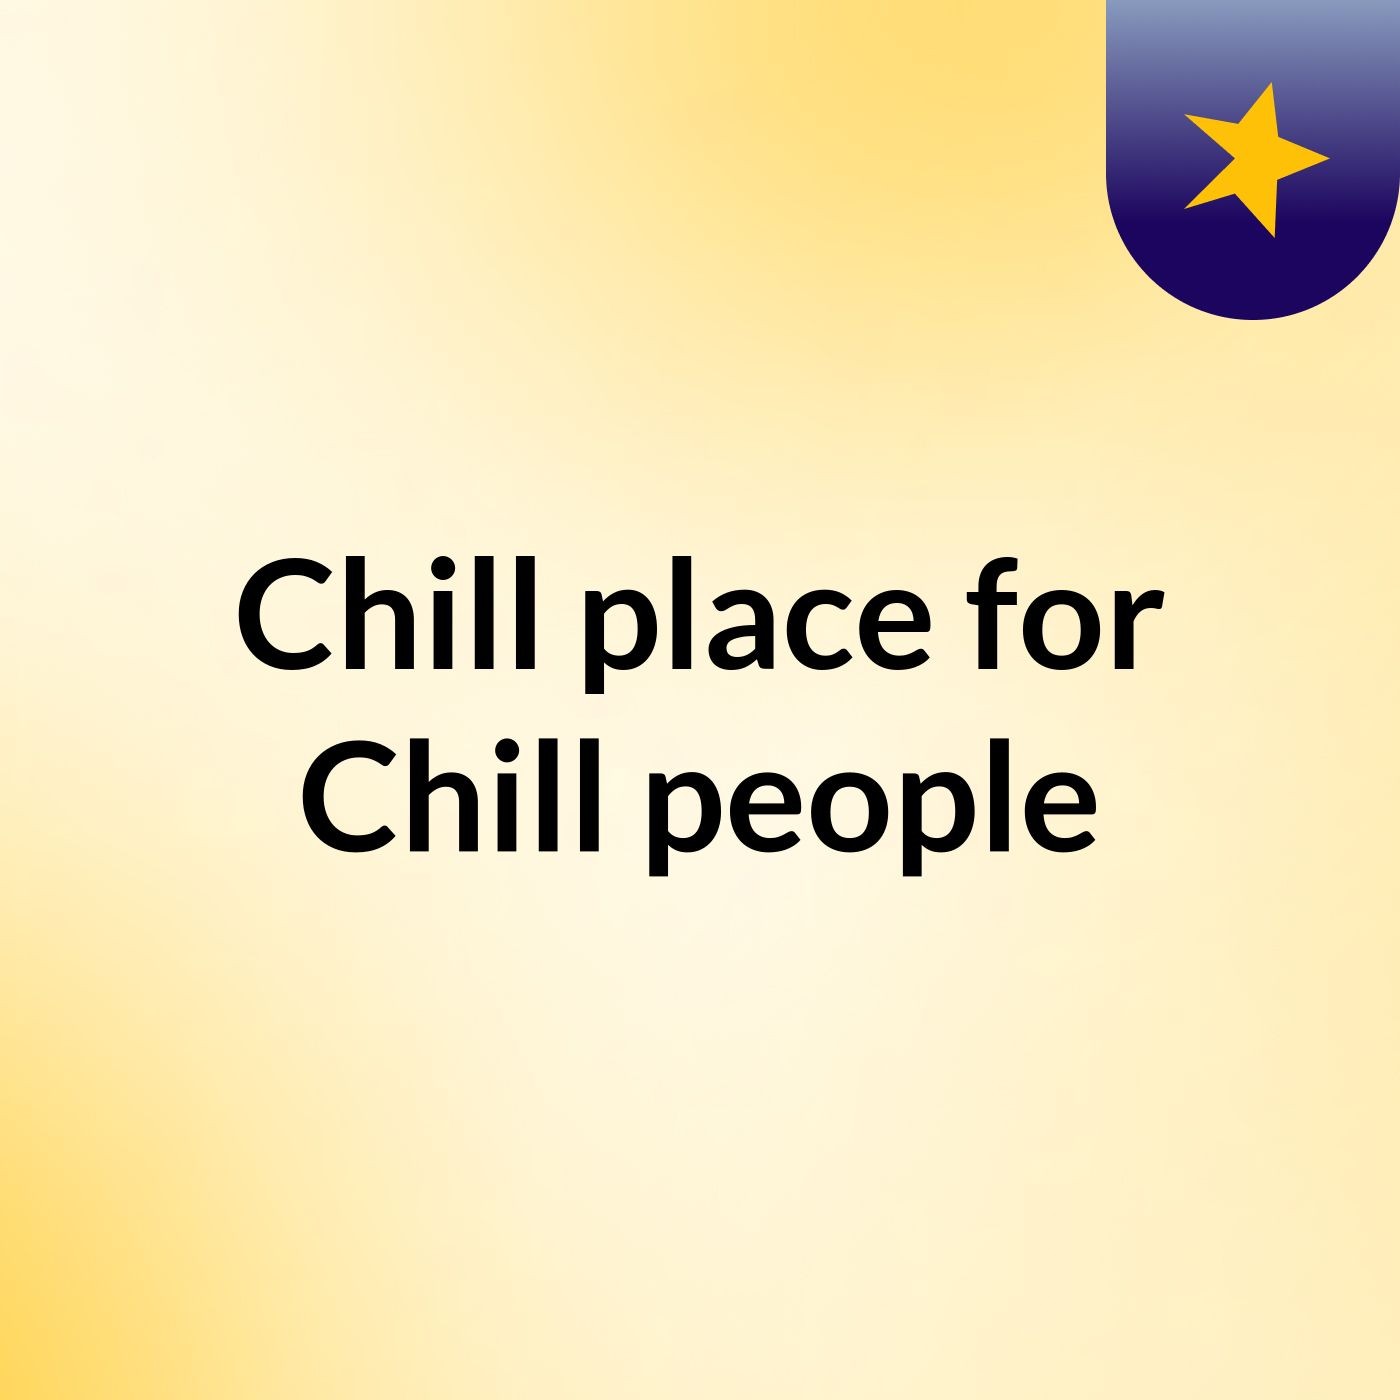 Chill place for Chill people